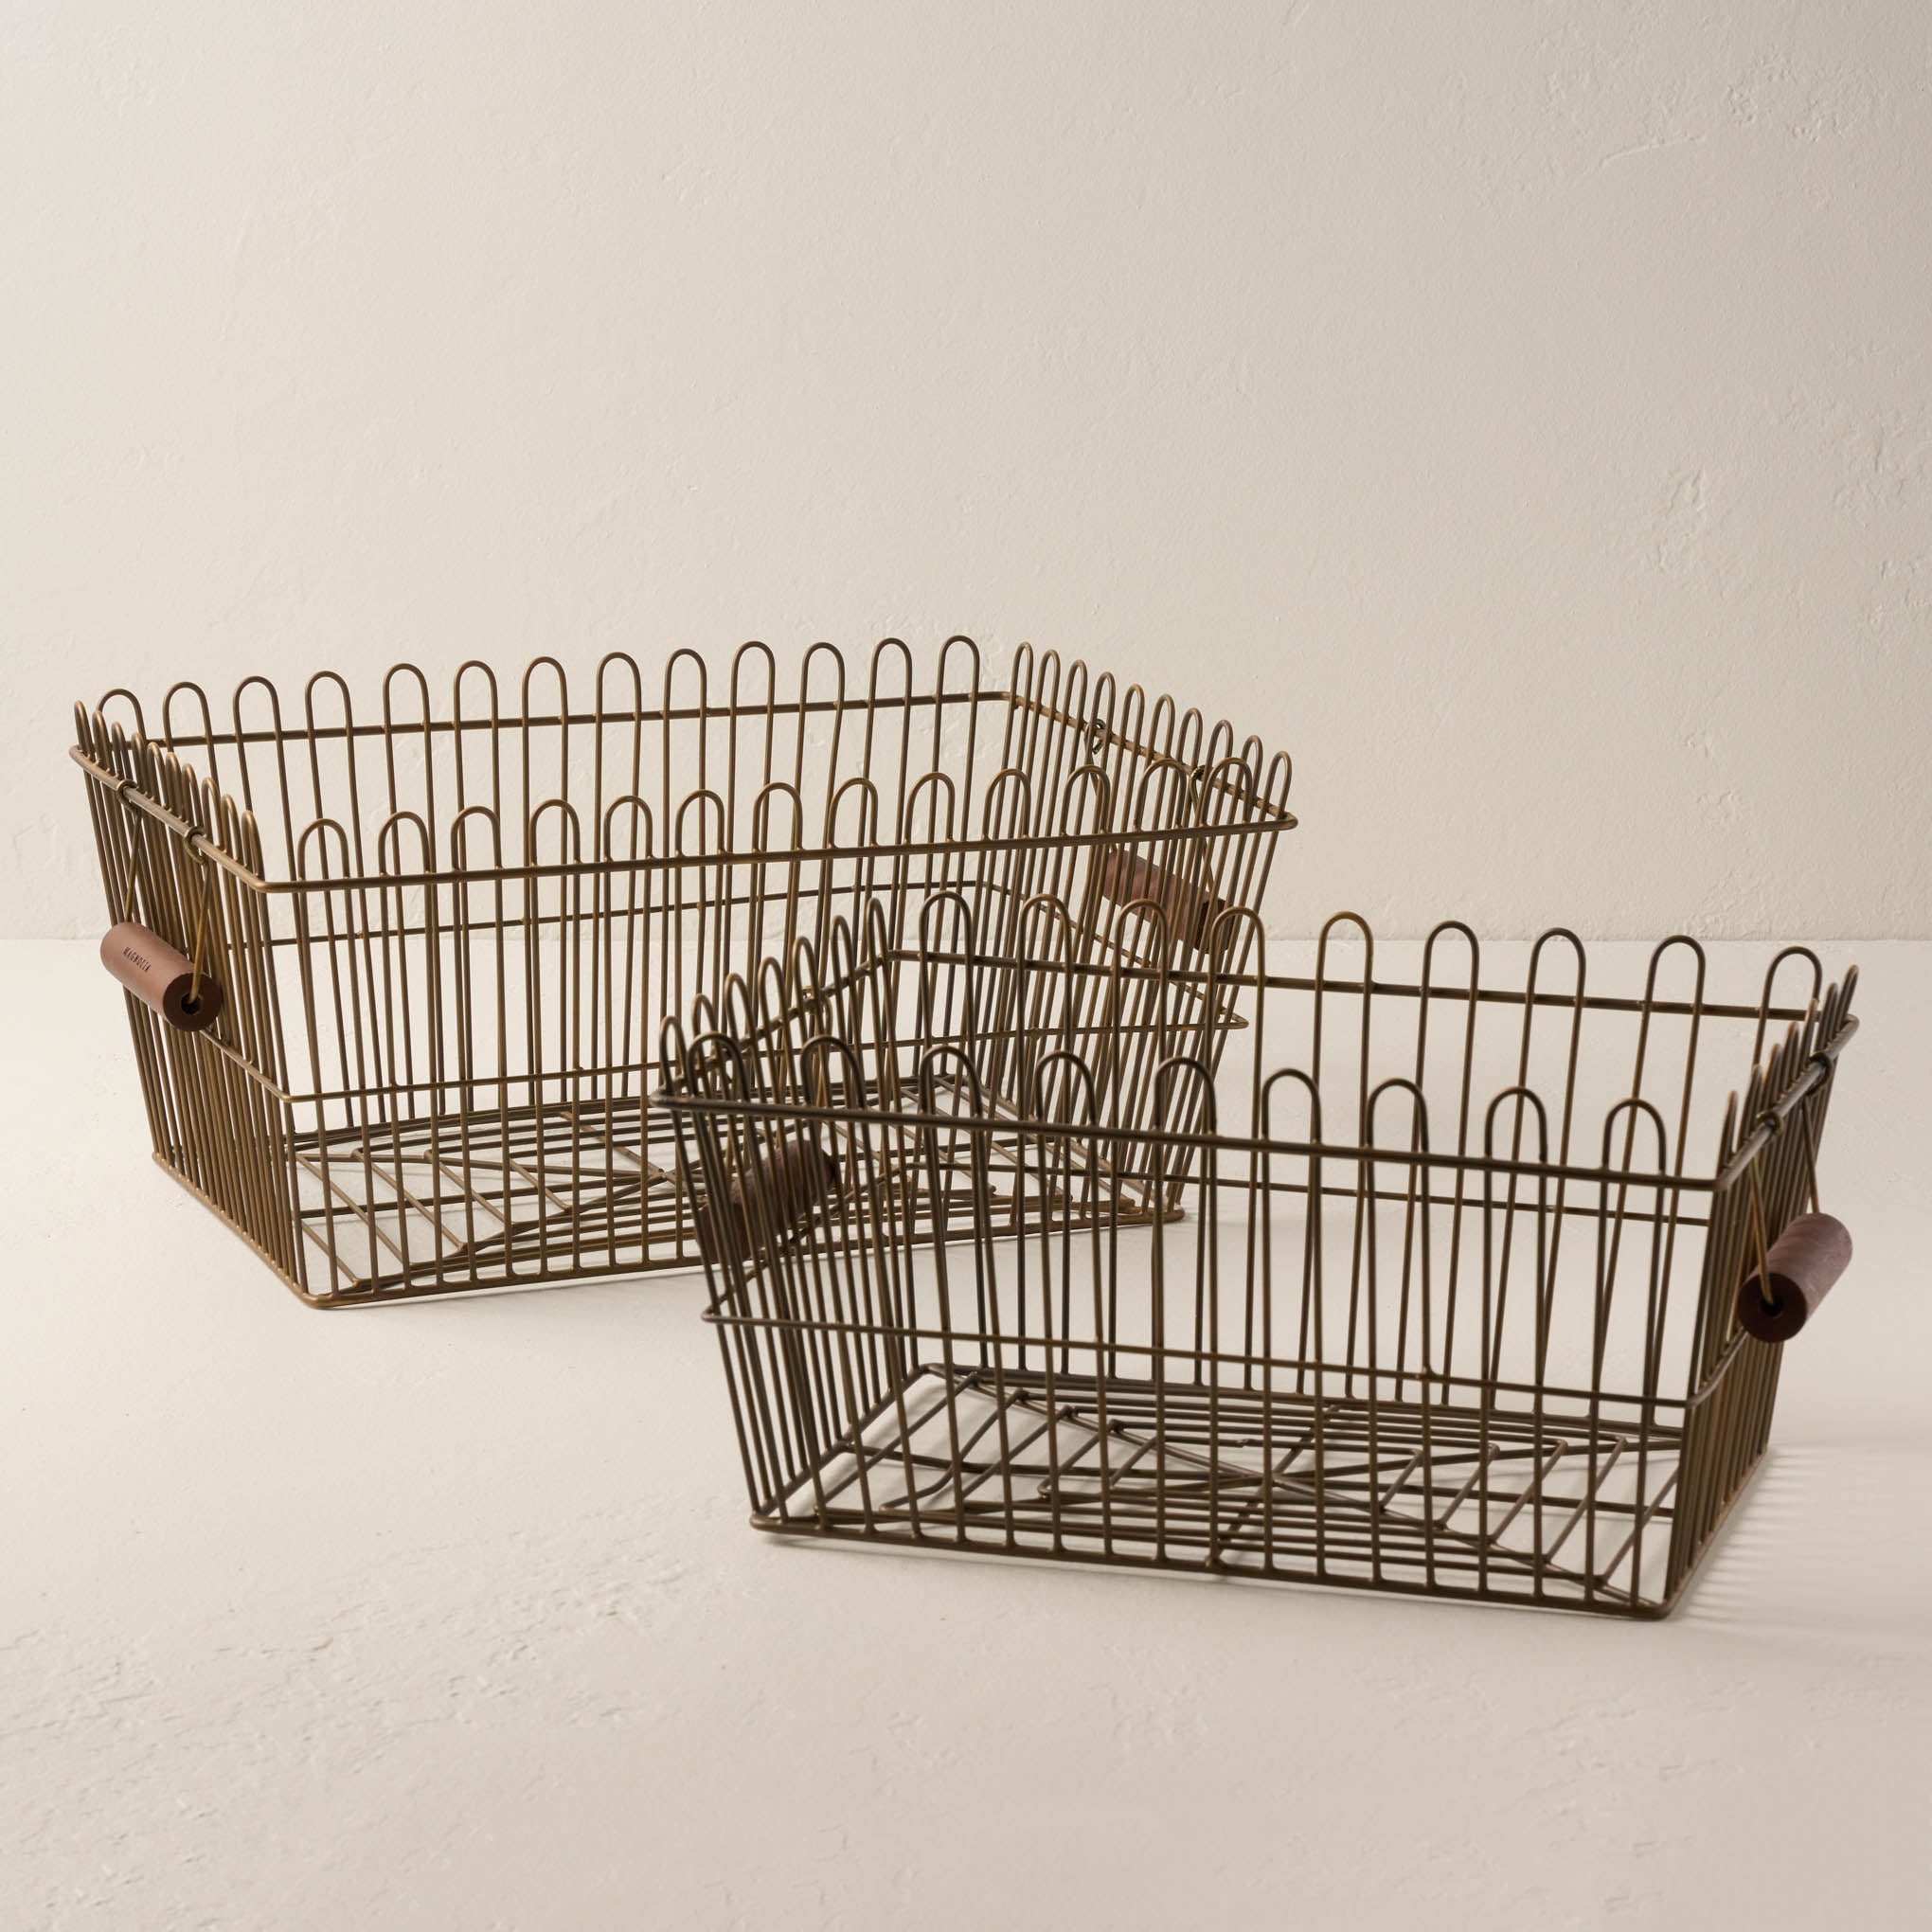 large and small sized rectangular vintage wire baskets On sale for $35.20, discounted from $44.00